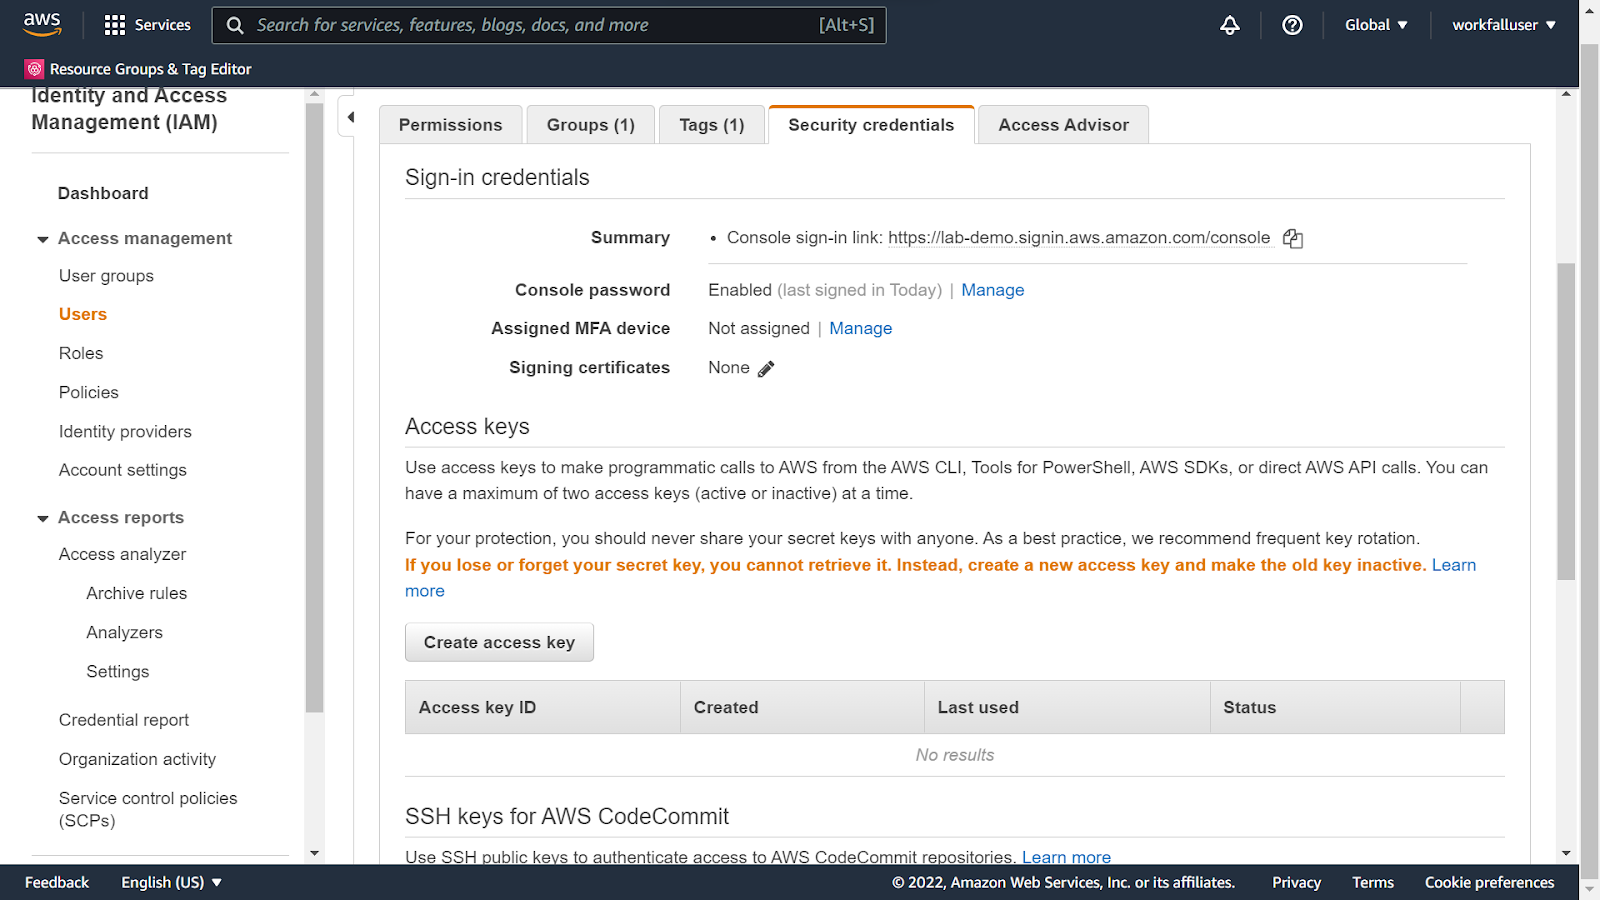 How to create and delete Email Templates on Amazon SES using Node.js and Postman API?